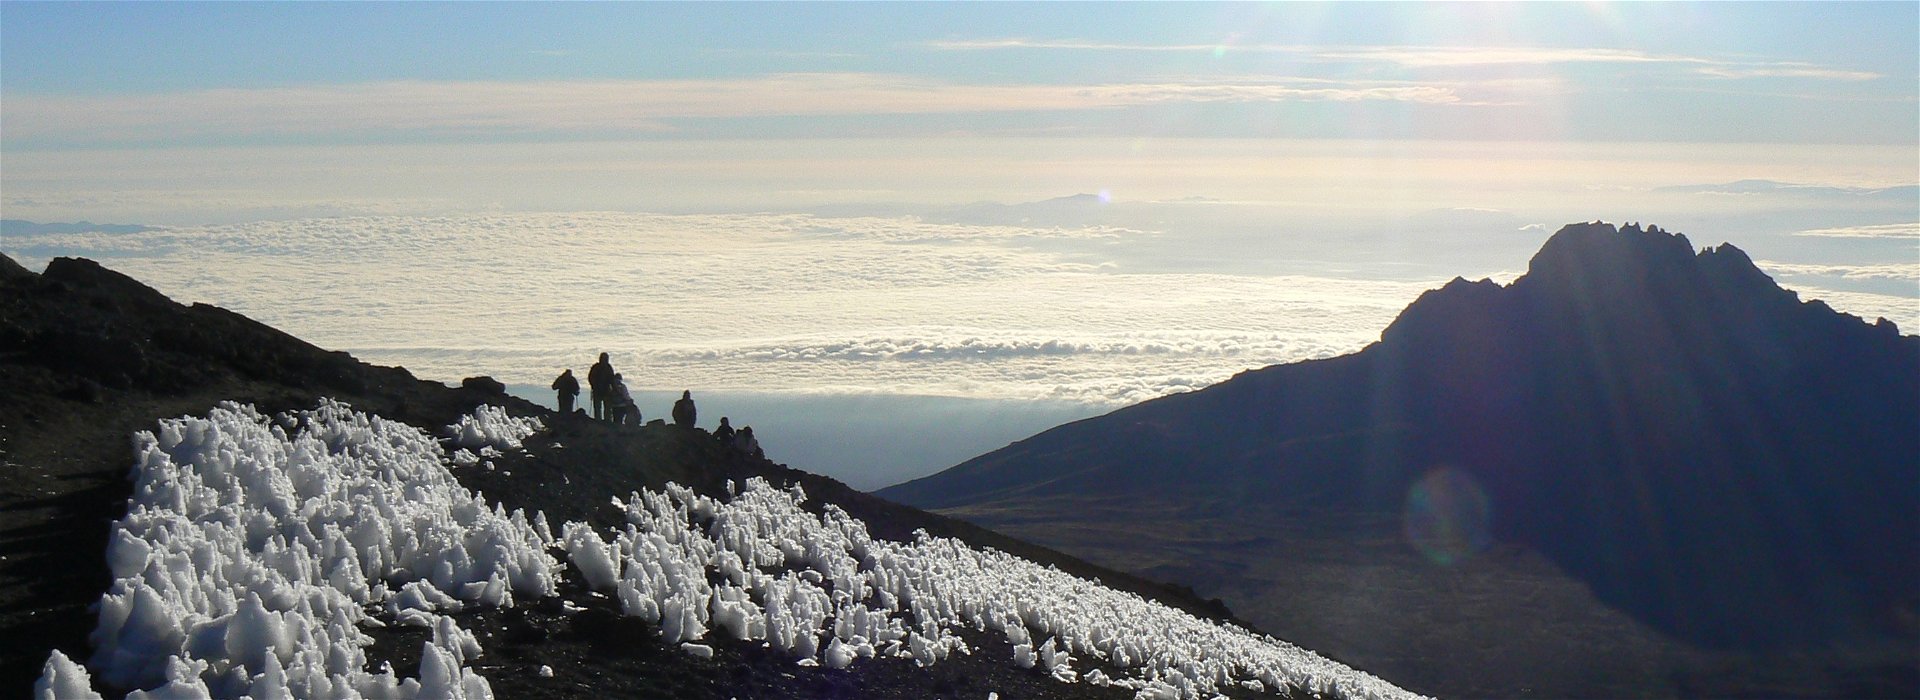 What A Difference a Day Makes - Kilimanjaro